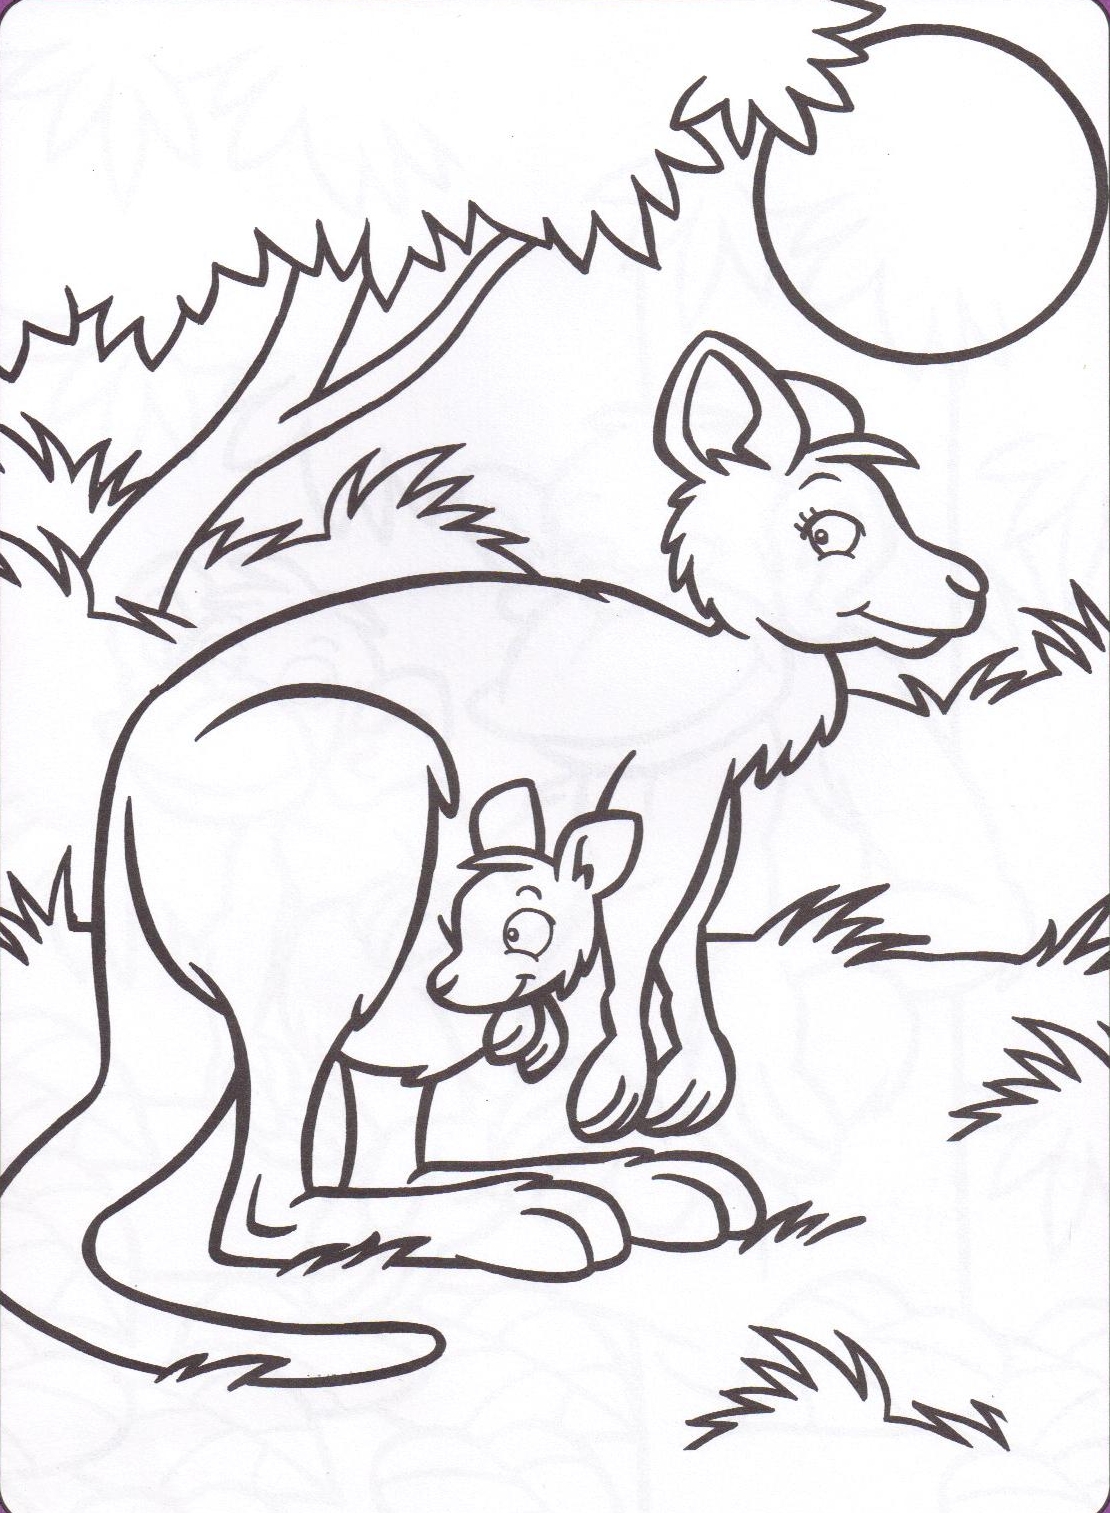 Fun kangaroo coloring pages to print and color